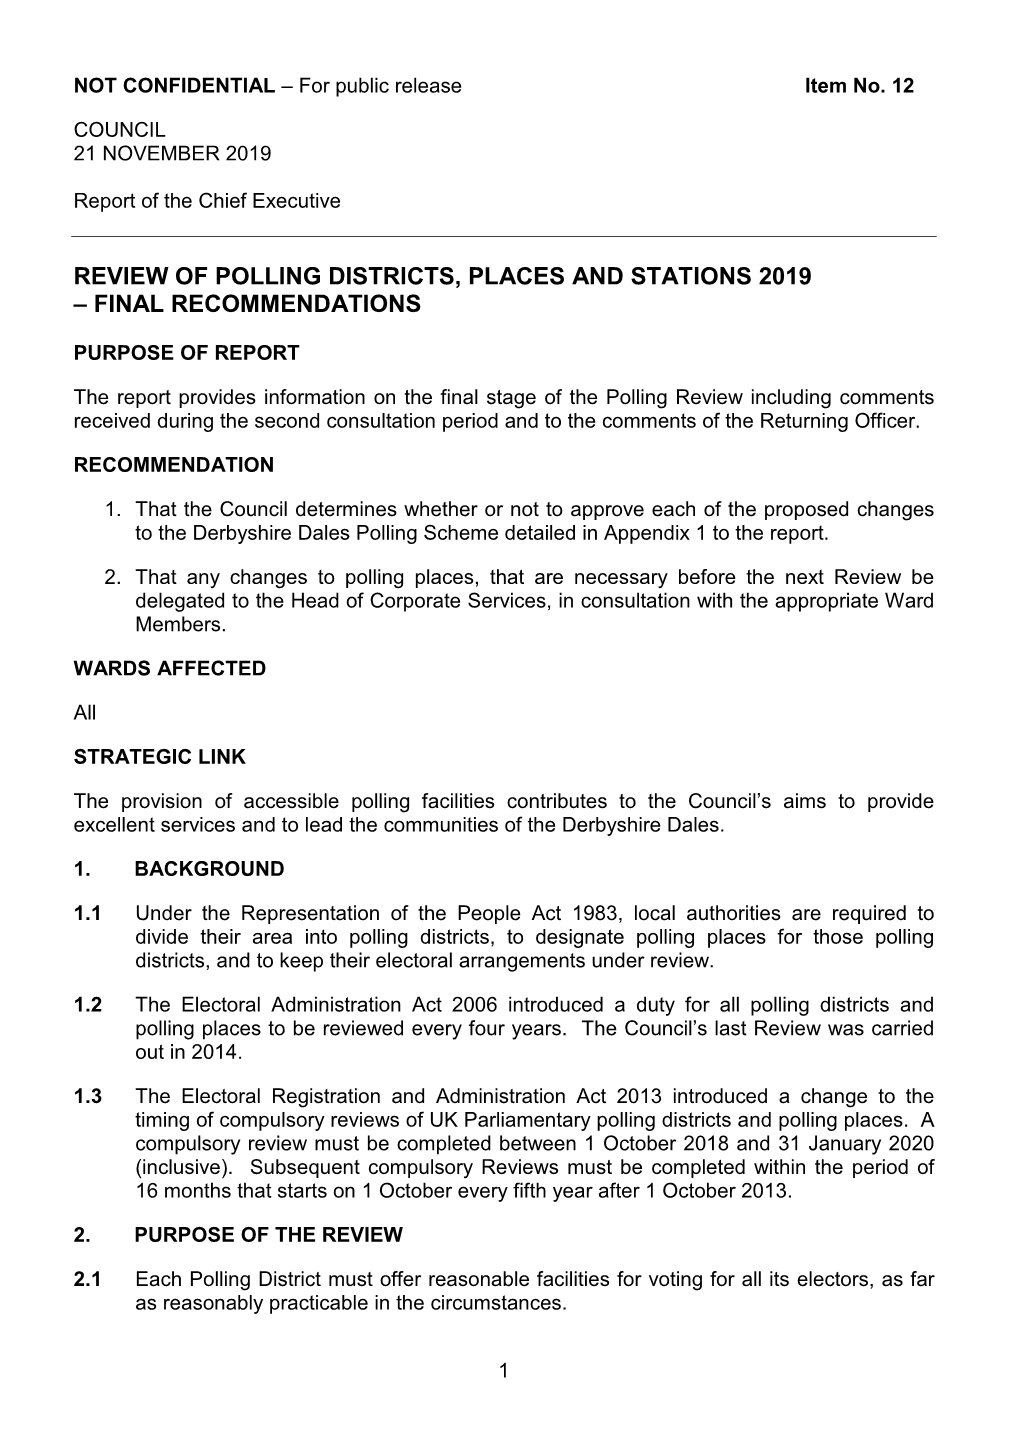 Review of Polling Districts, Places and Stations 2019 – Final Recommendations